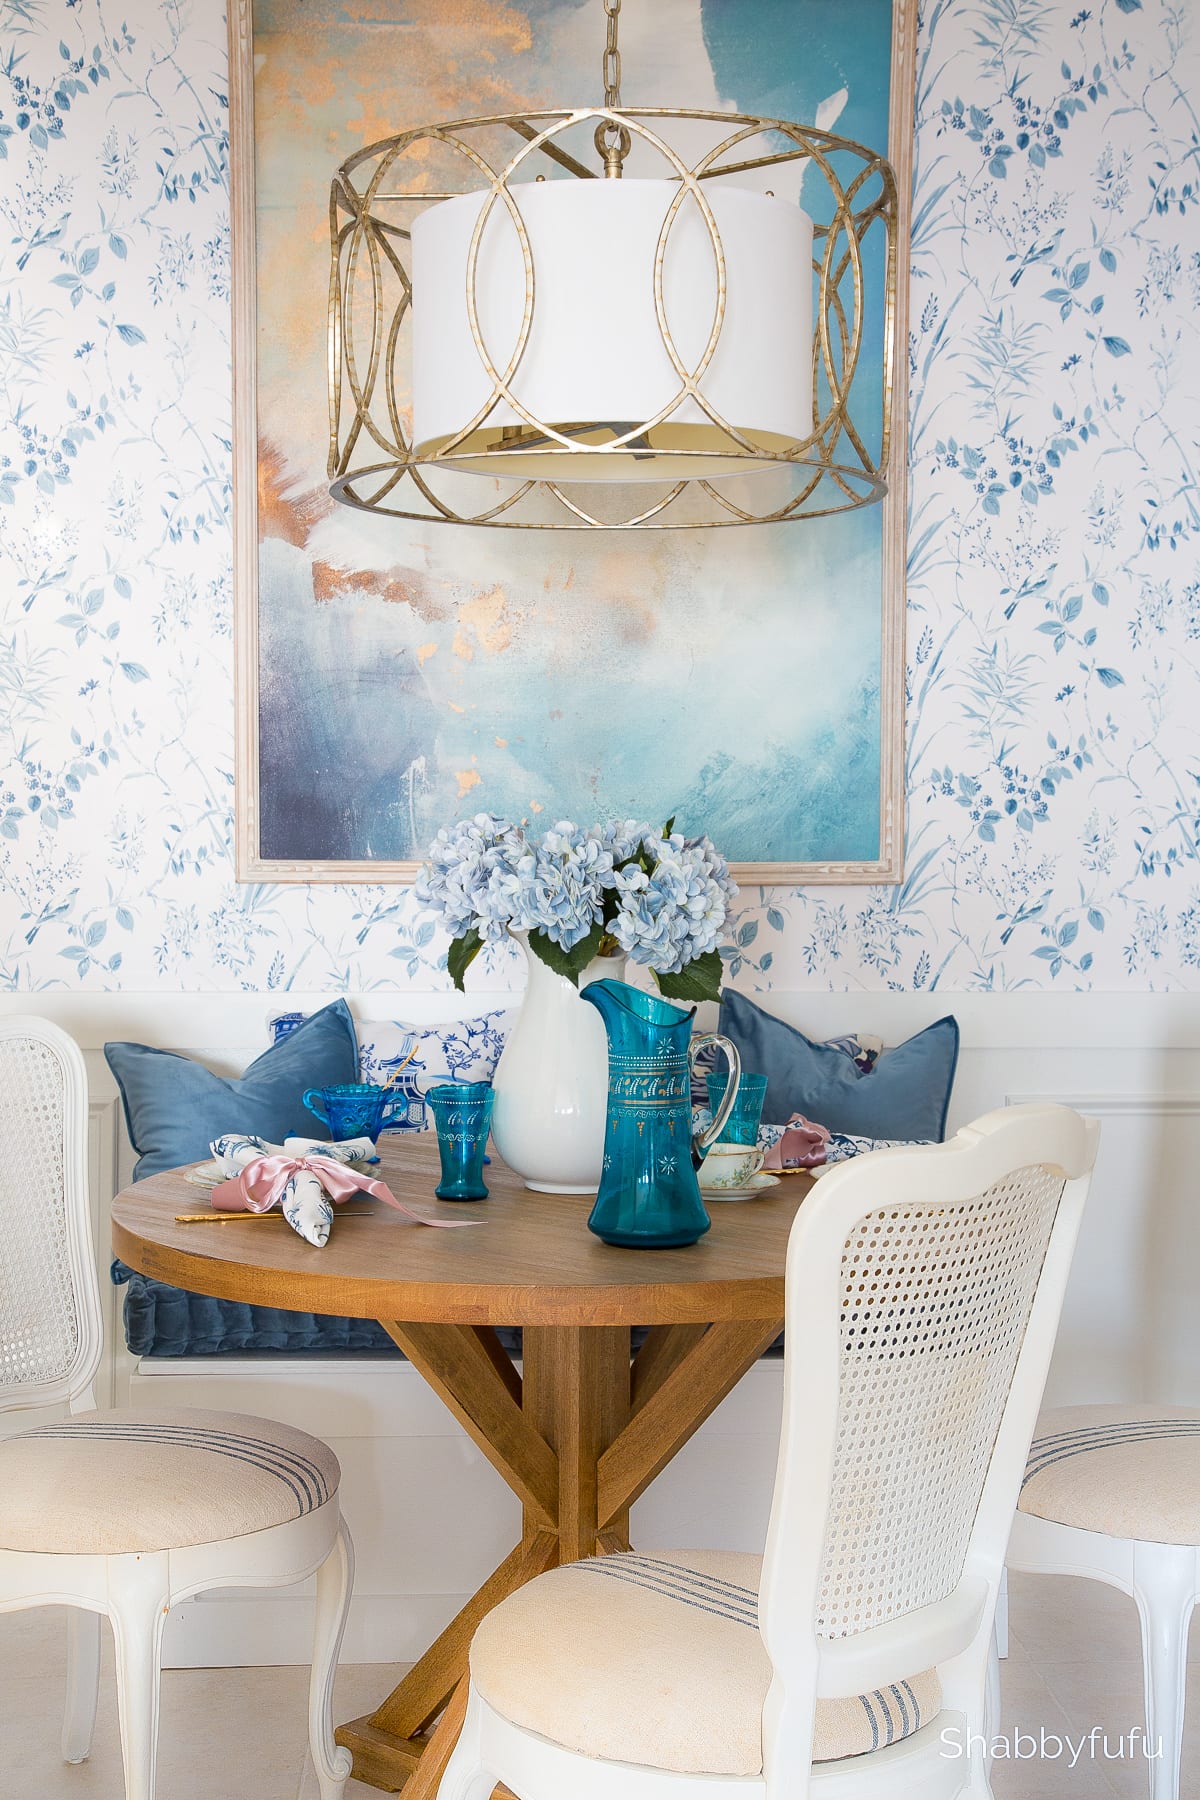 How To Build A Simple Breakfast Room Banquette